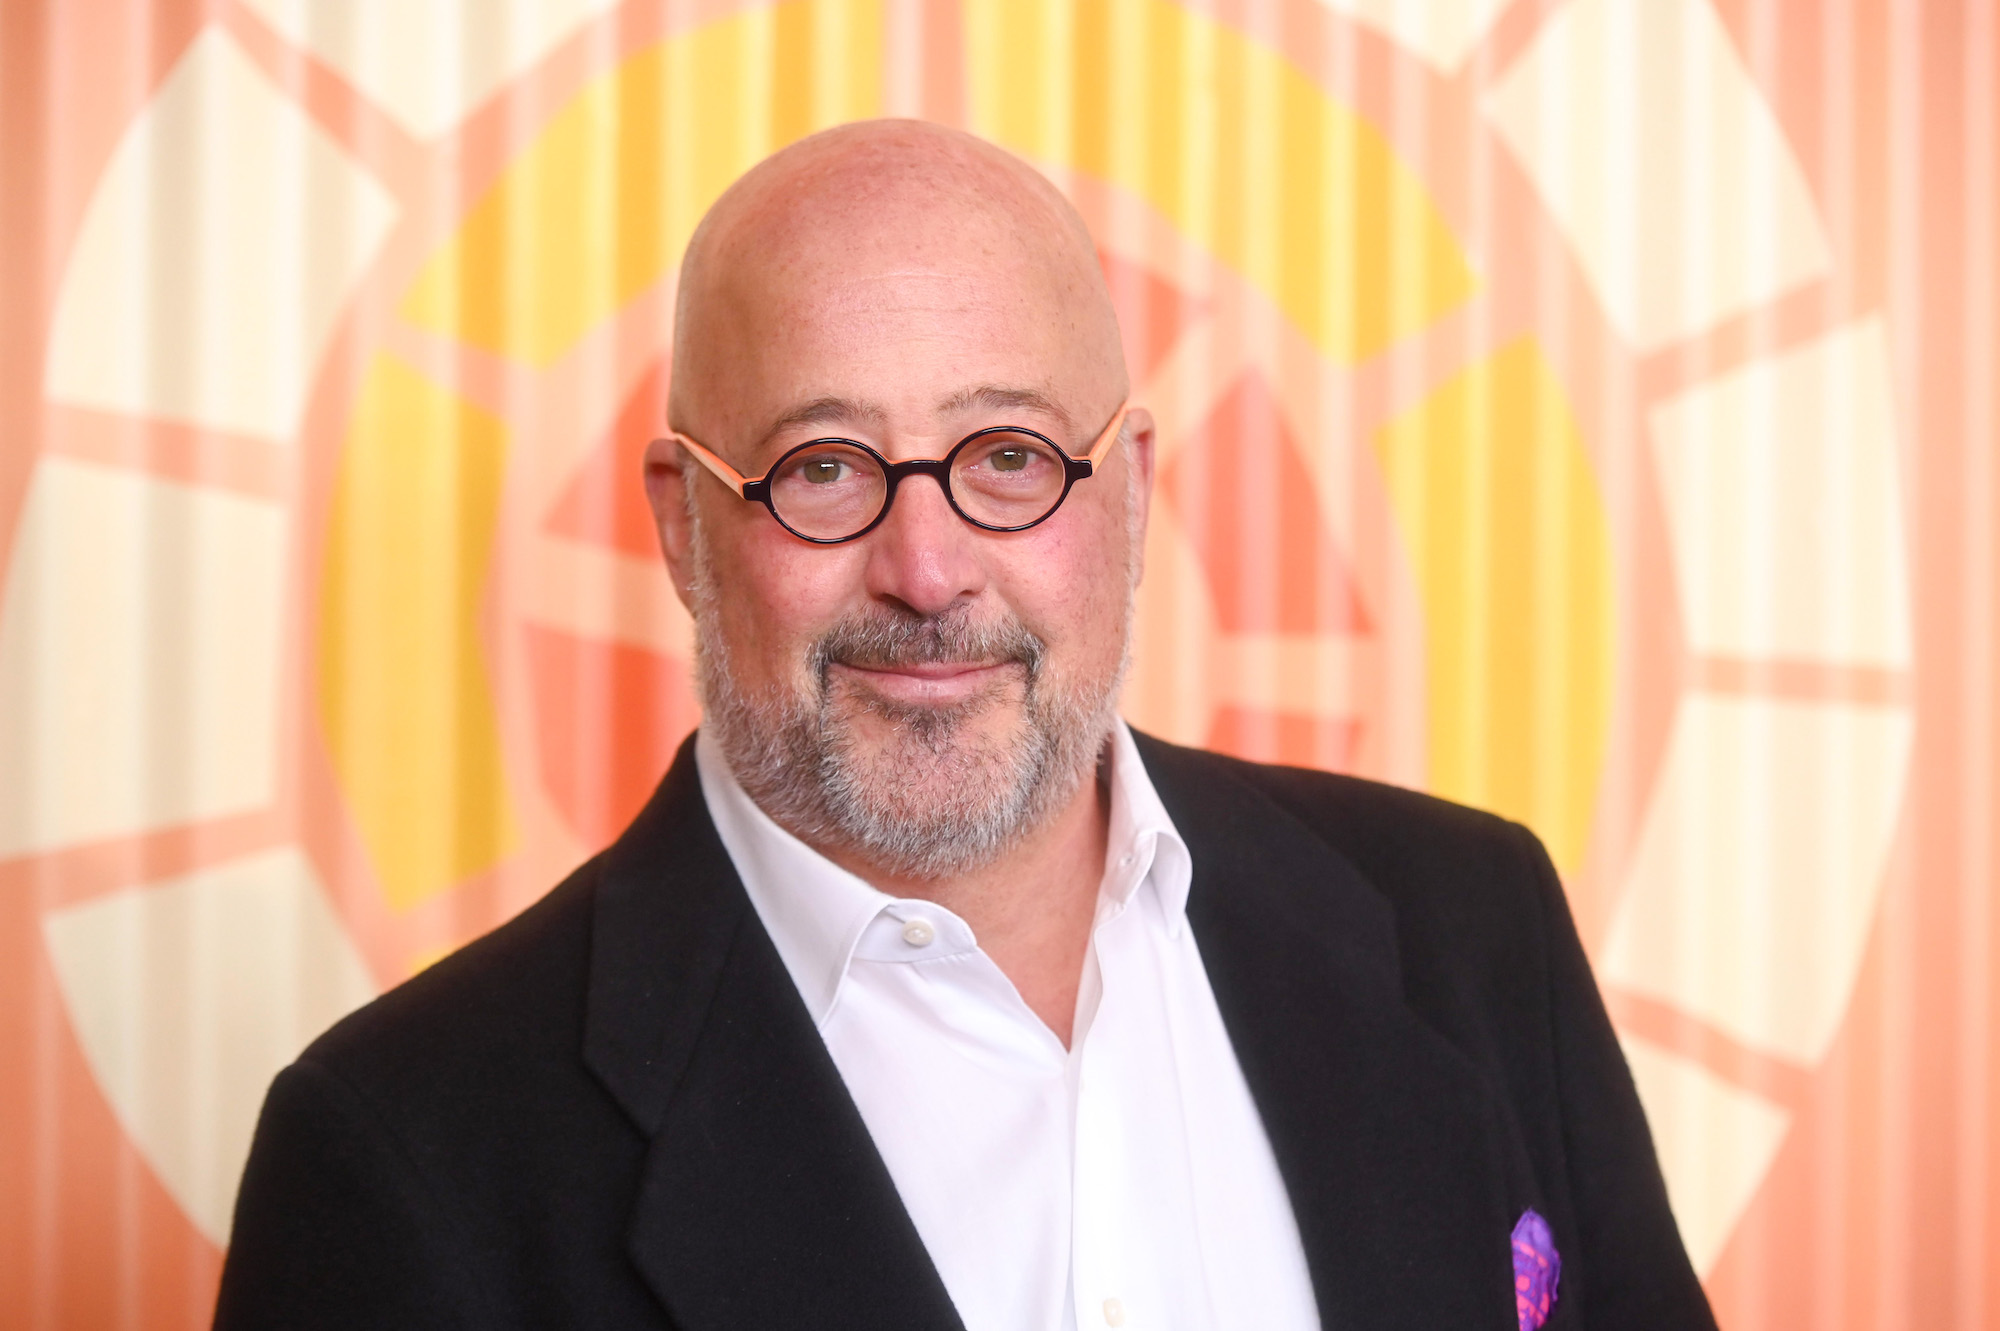 Andrew Zimmern smiling in front of an orange background